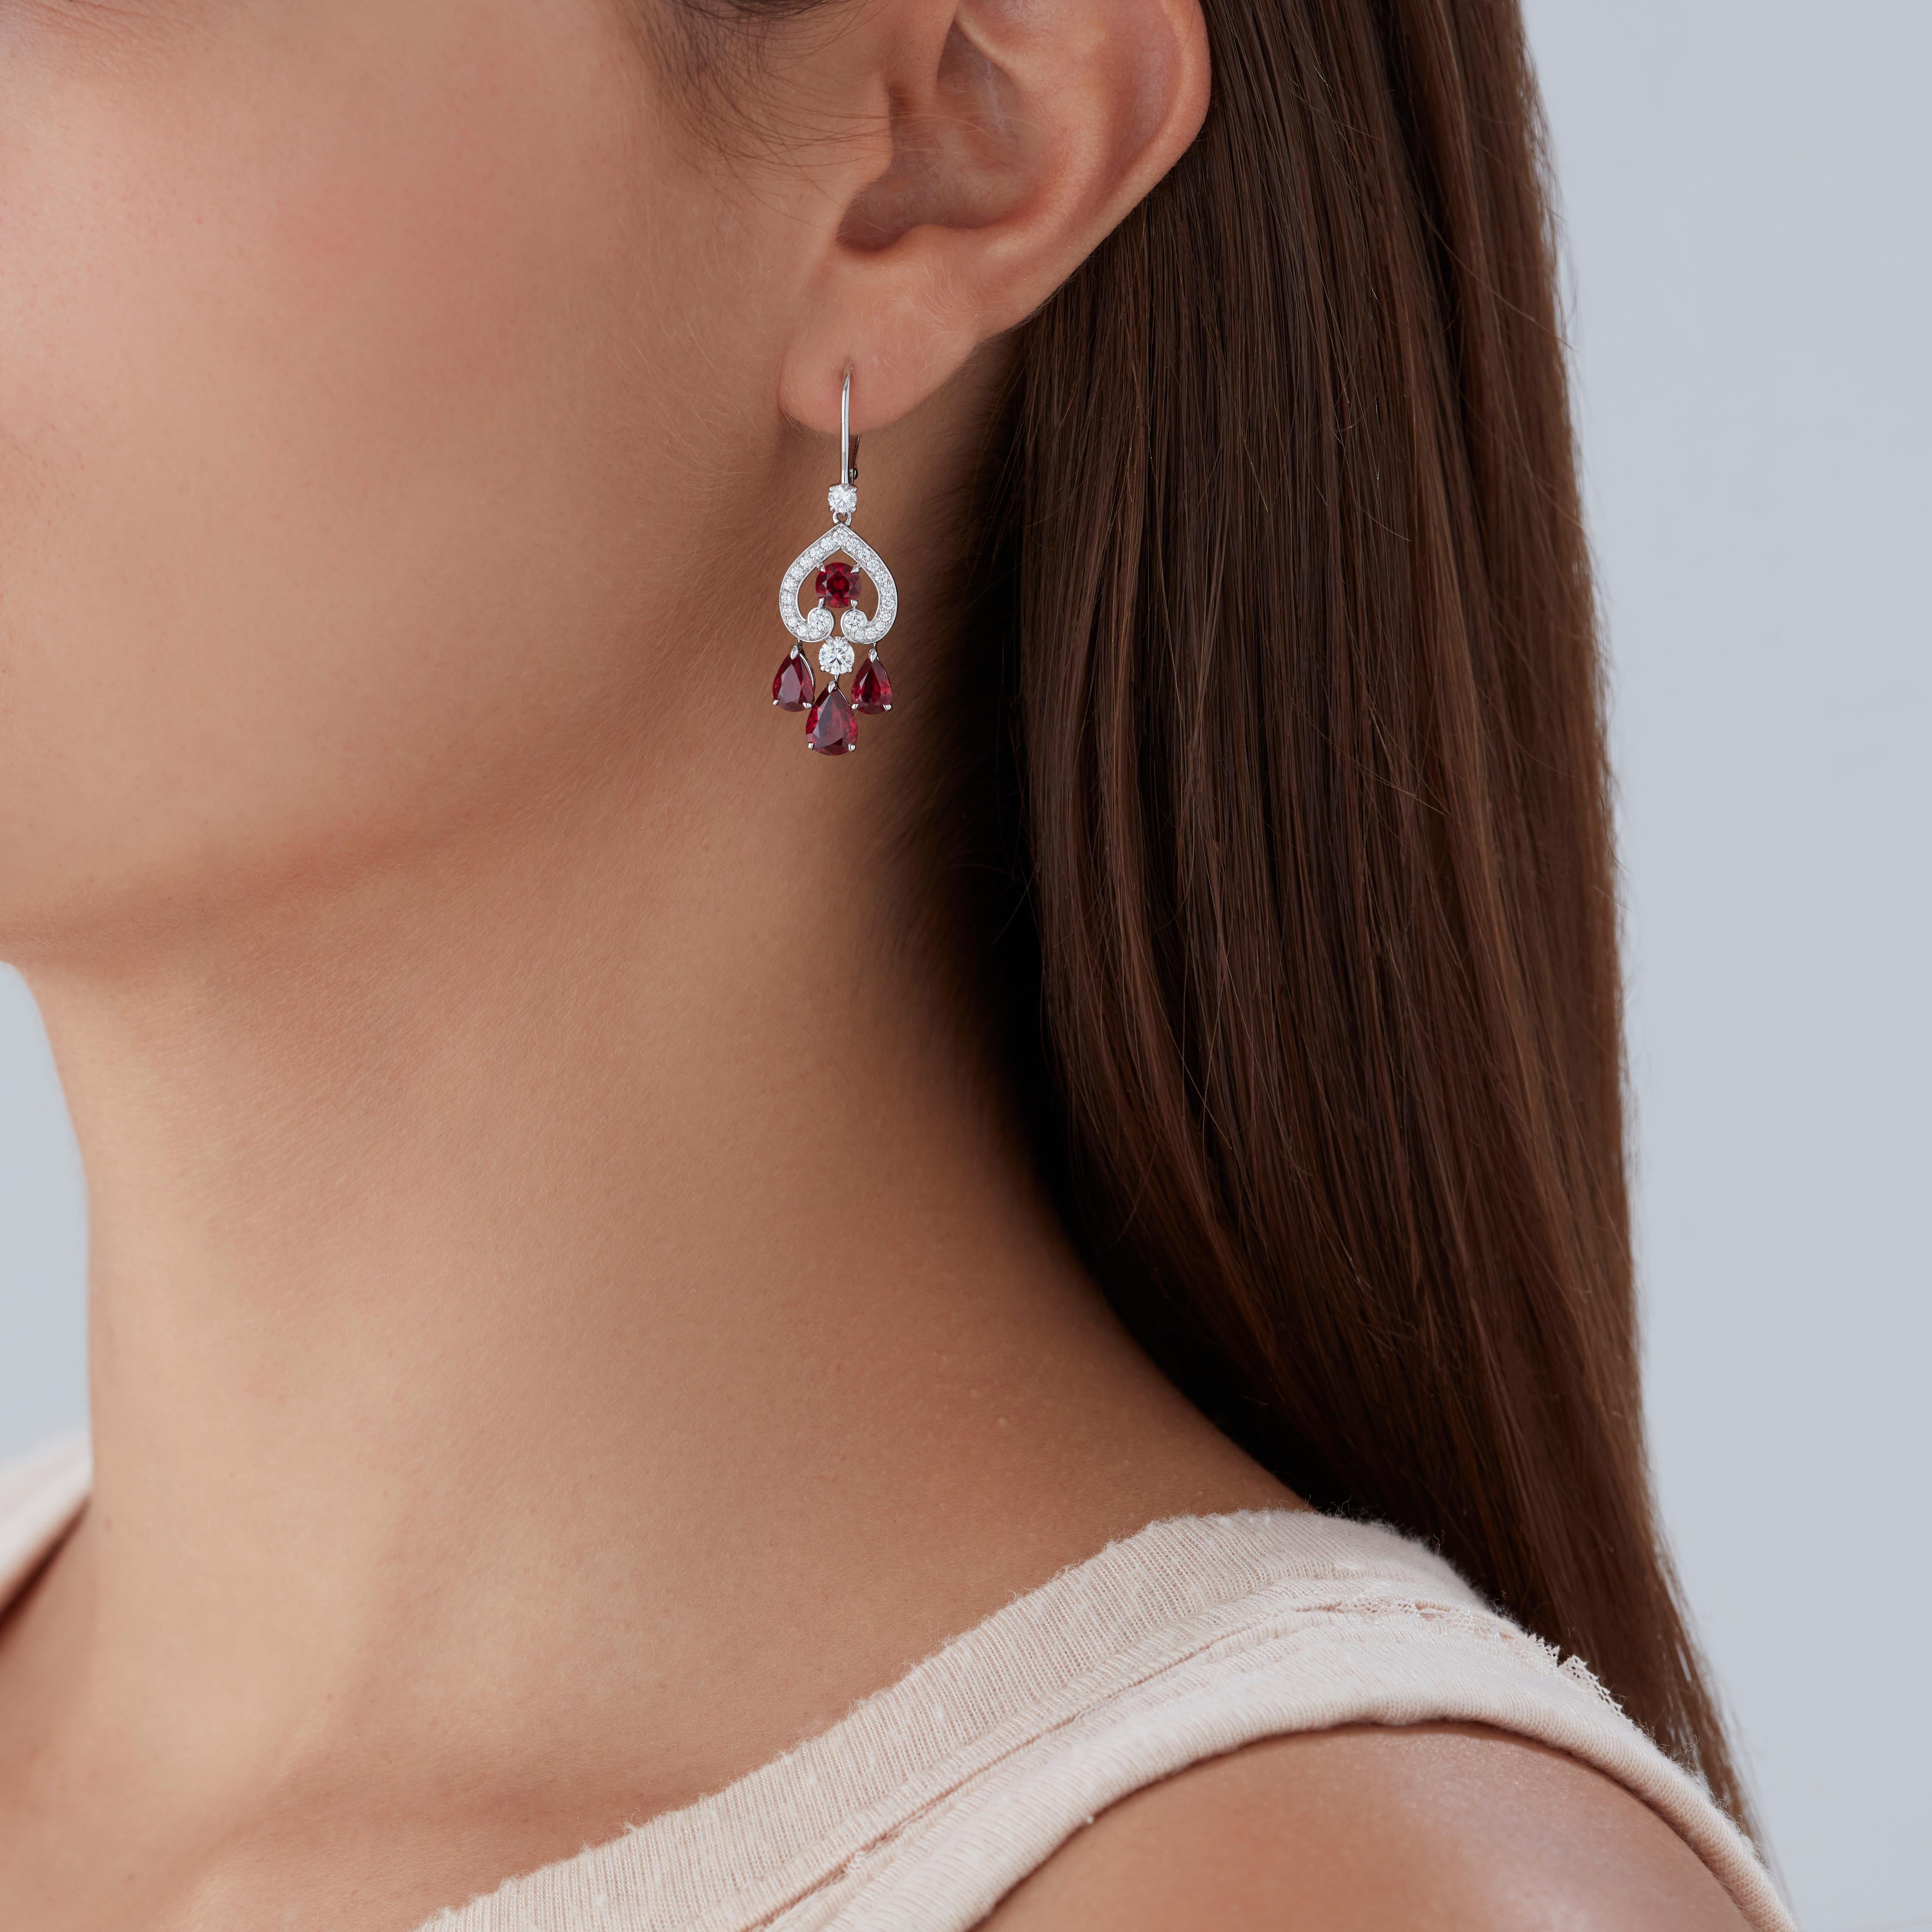 A House of Garrard pair of 18 karat white gold 'Mini Ruby Drop' earrings from the 'Regal Cascade' collection, set with rubies and white diamonds. 

8 rubies weighing: 4.86cts 
50 white diamonds weighing: 0.88cts 

The House of Garrard is the longest